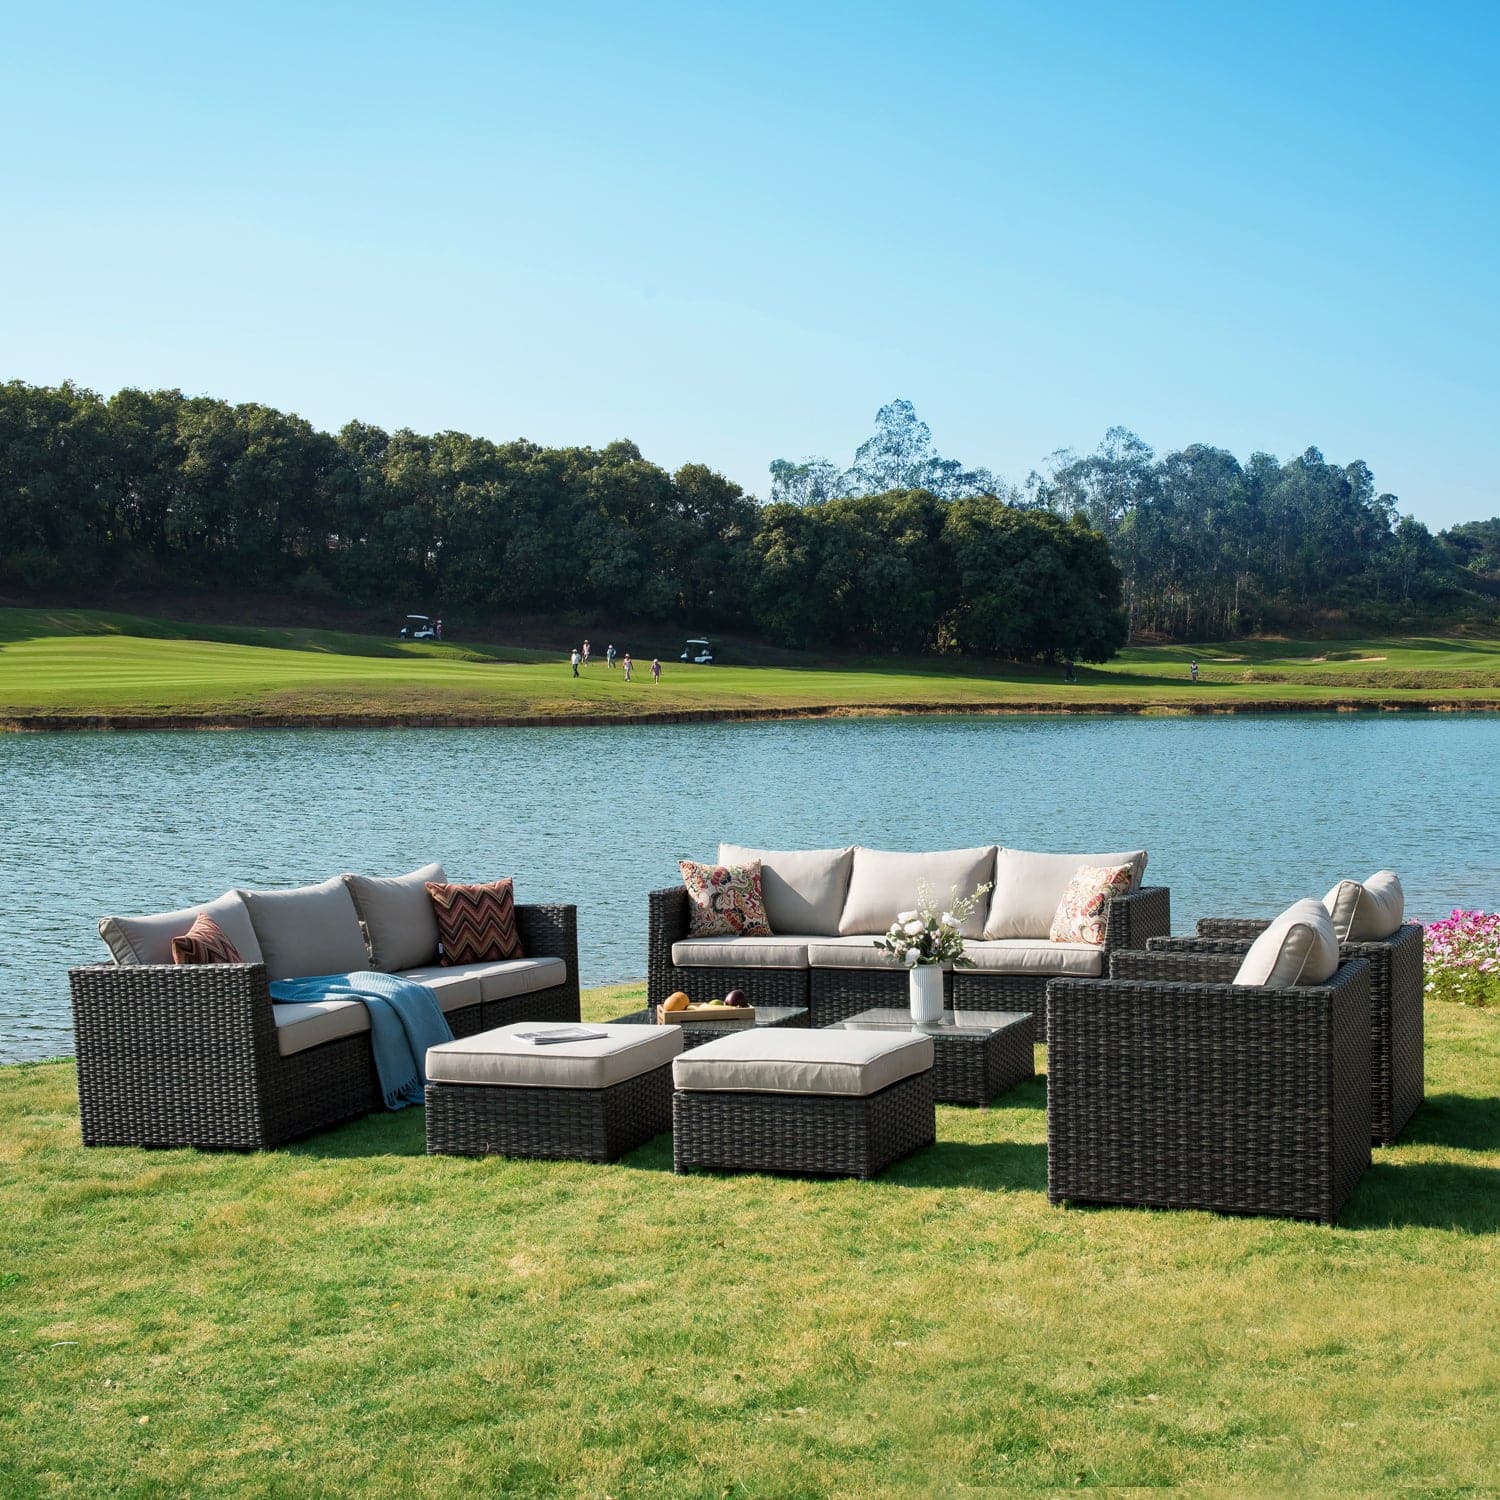 Ovios Patio Furniture Set Bigger Size 12-Piece, King Series, No Assembly Required